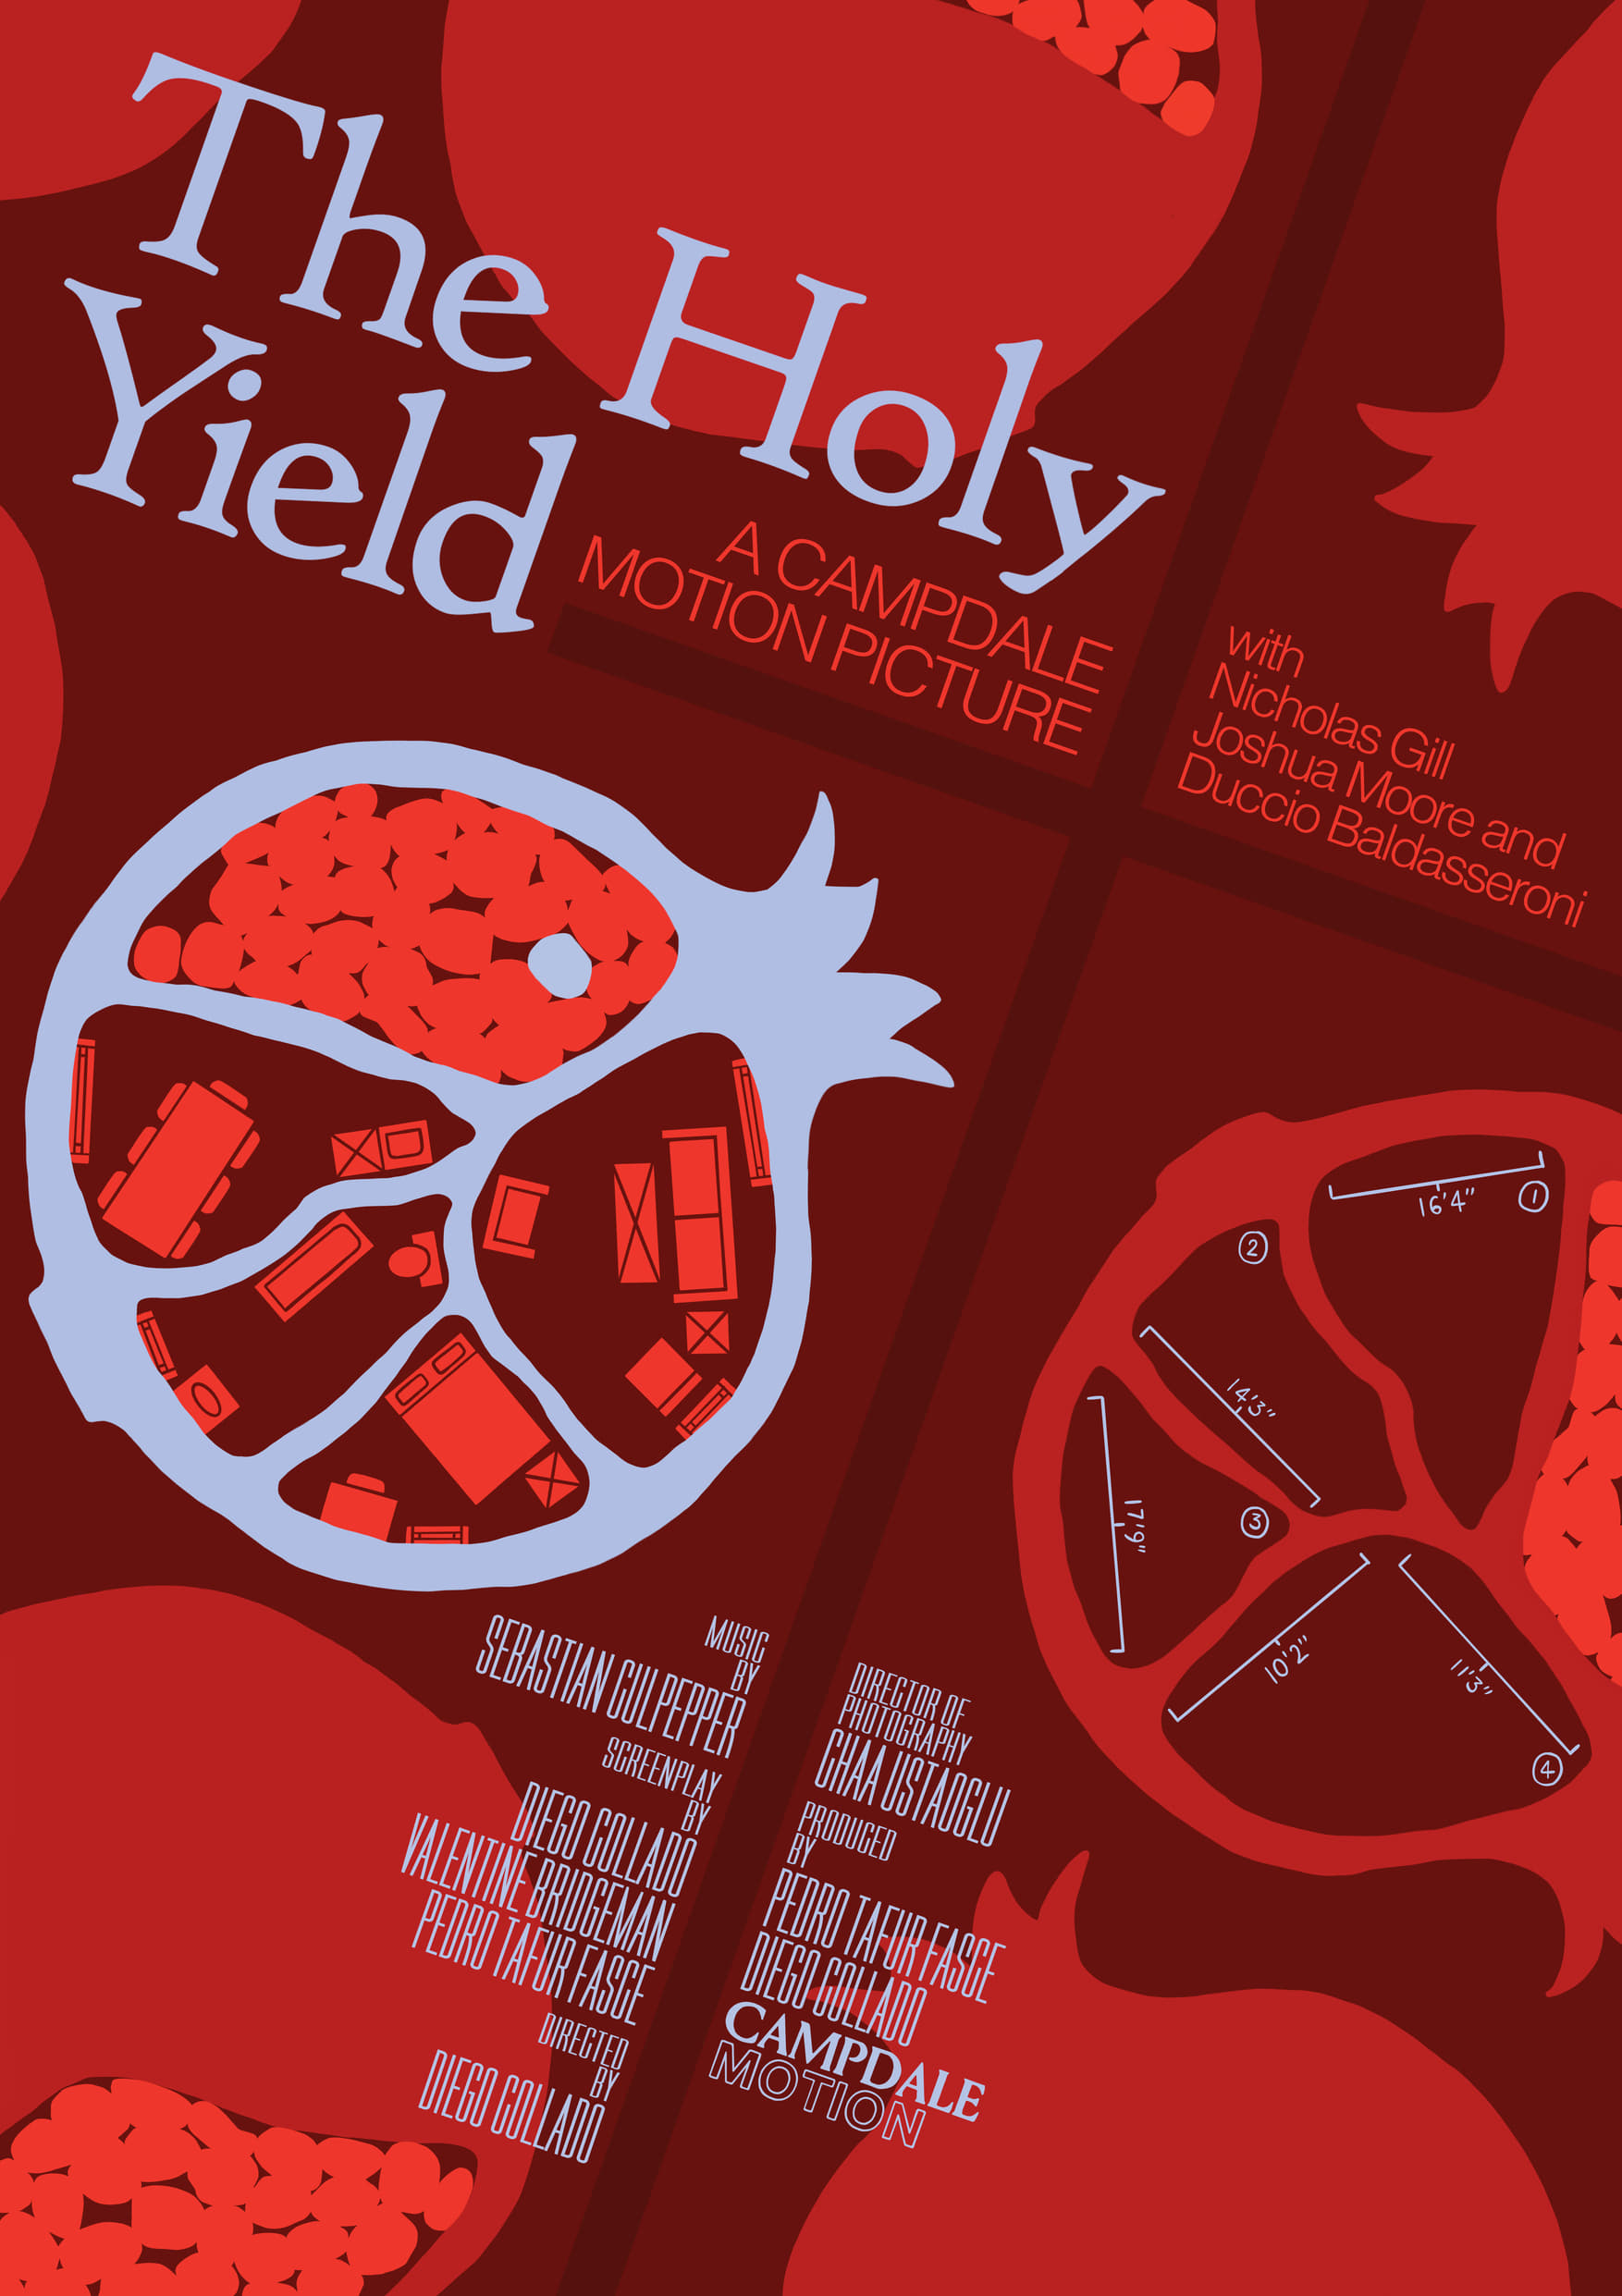 The Holy Yield